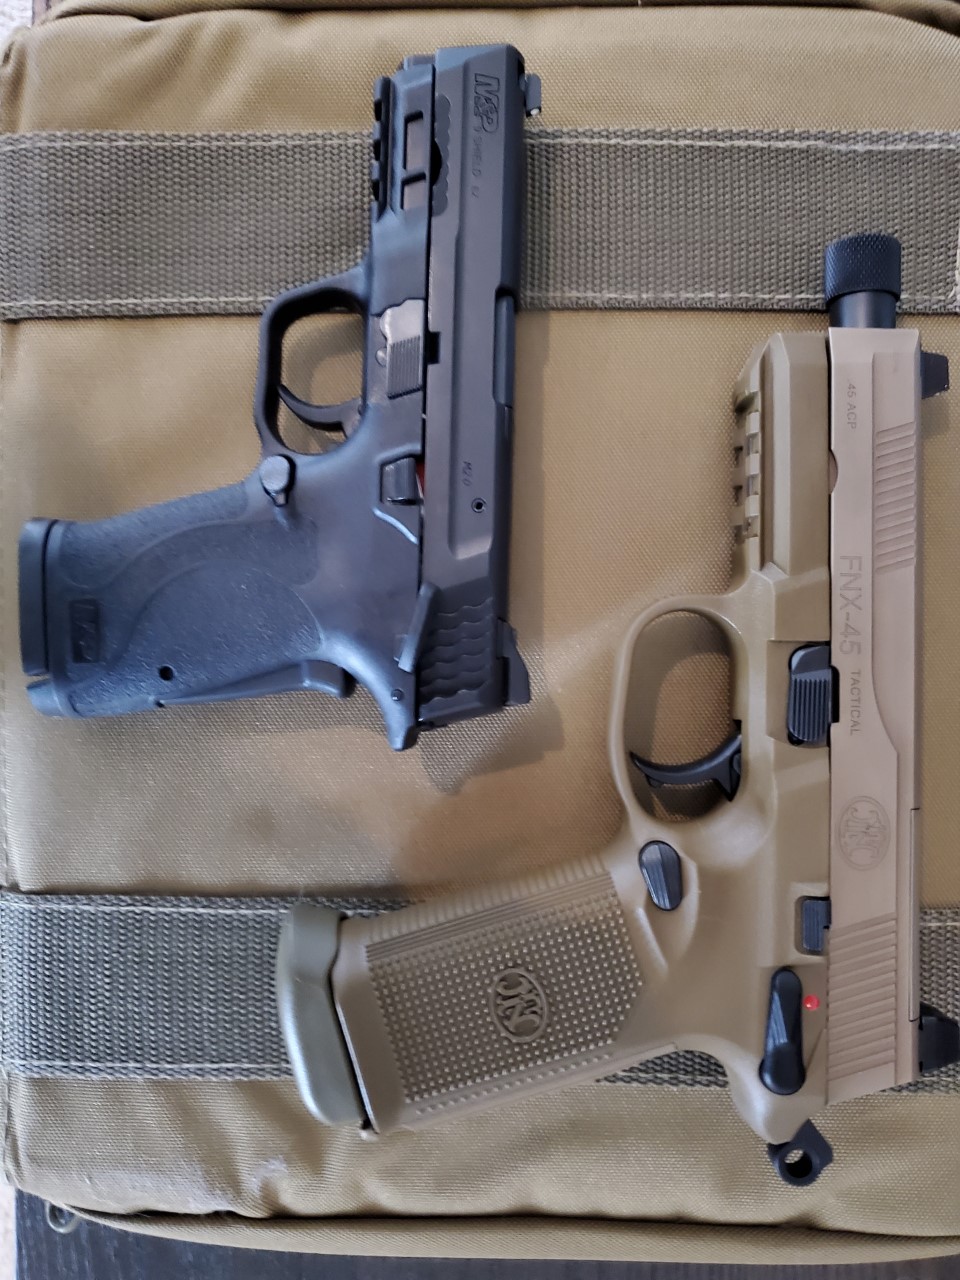 Both 9mm and 45.jpg